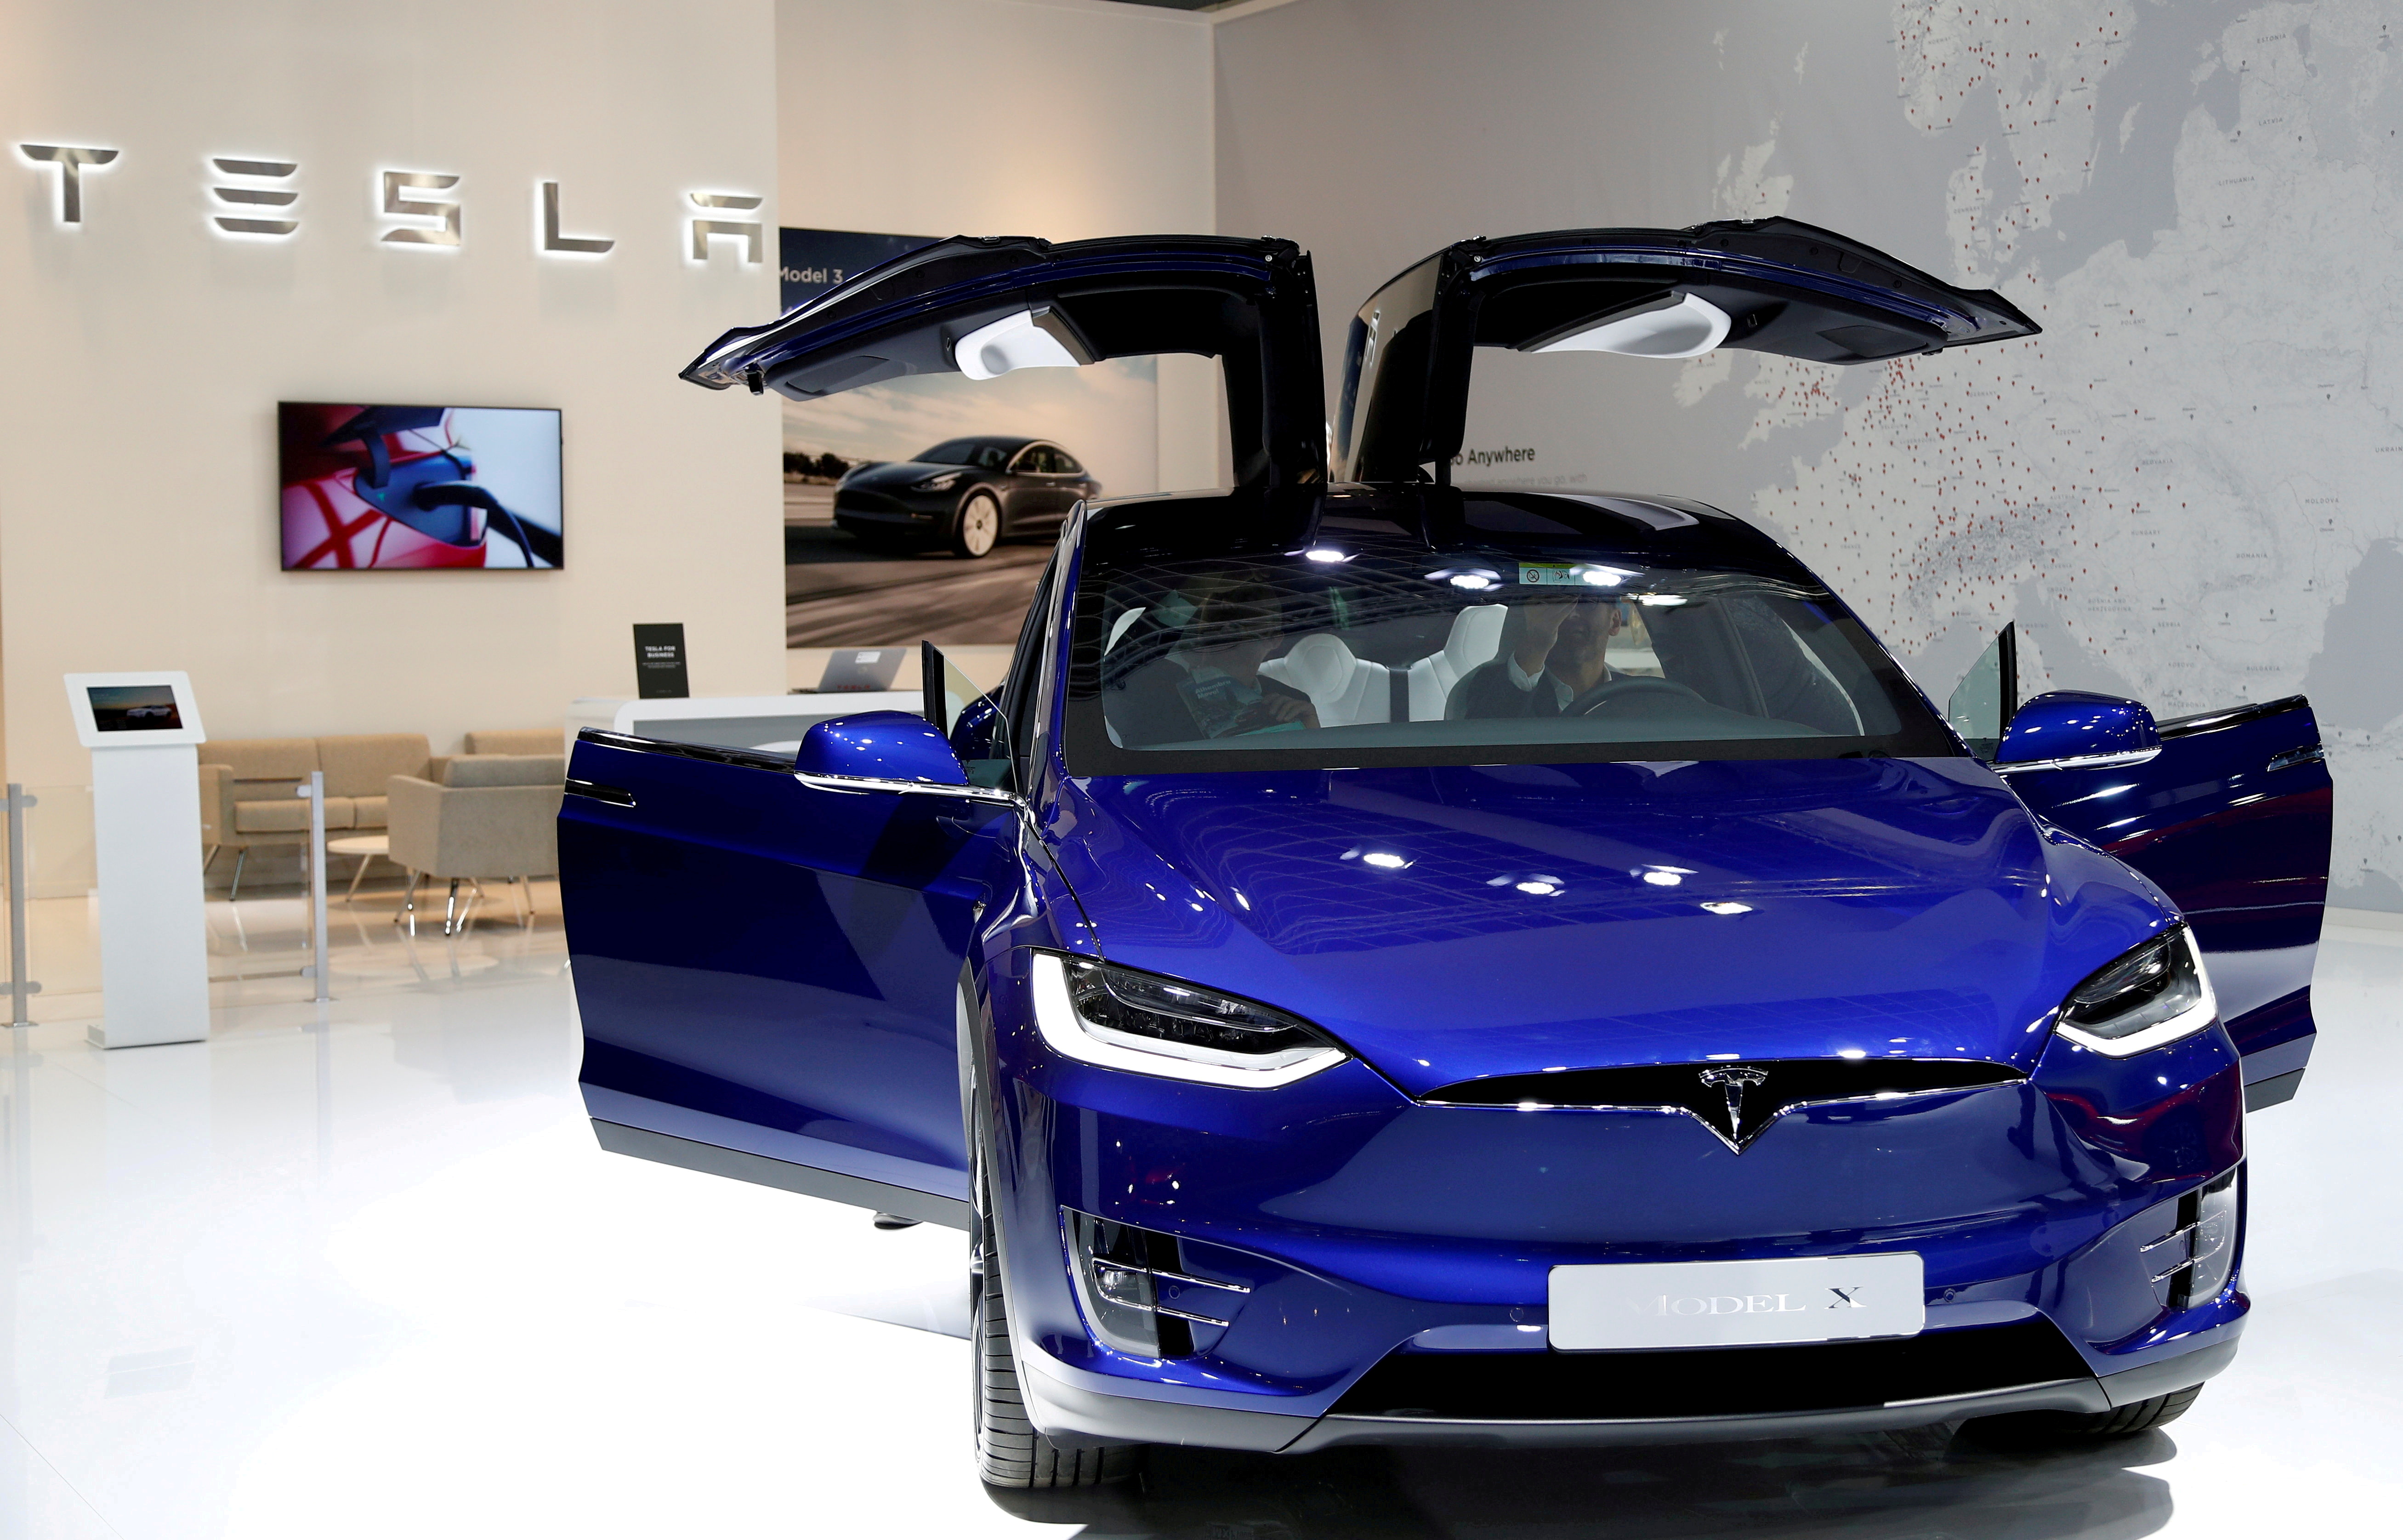 A Tesla Model X electric car is seen at the Brussels Motor Show, Belgium, January 9, 2020. REUTERS/Francois Lenoir